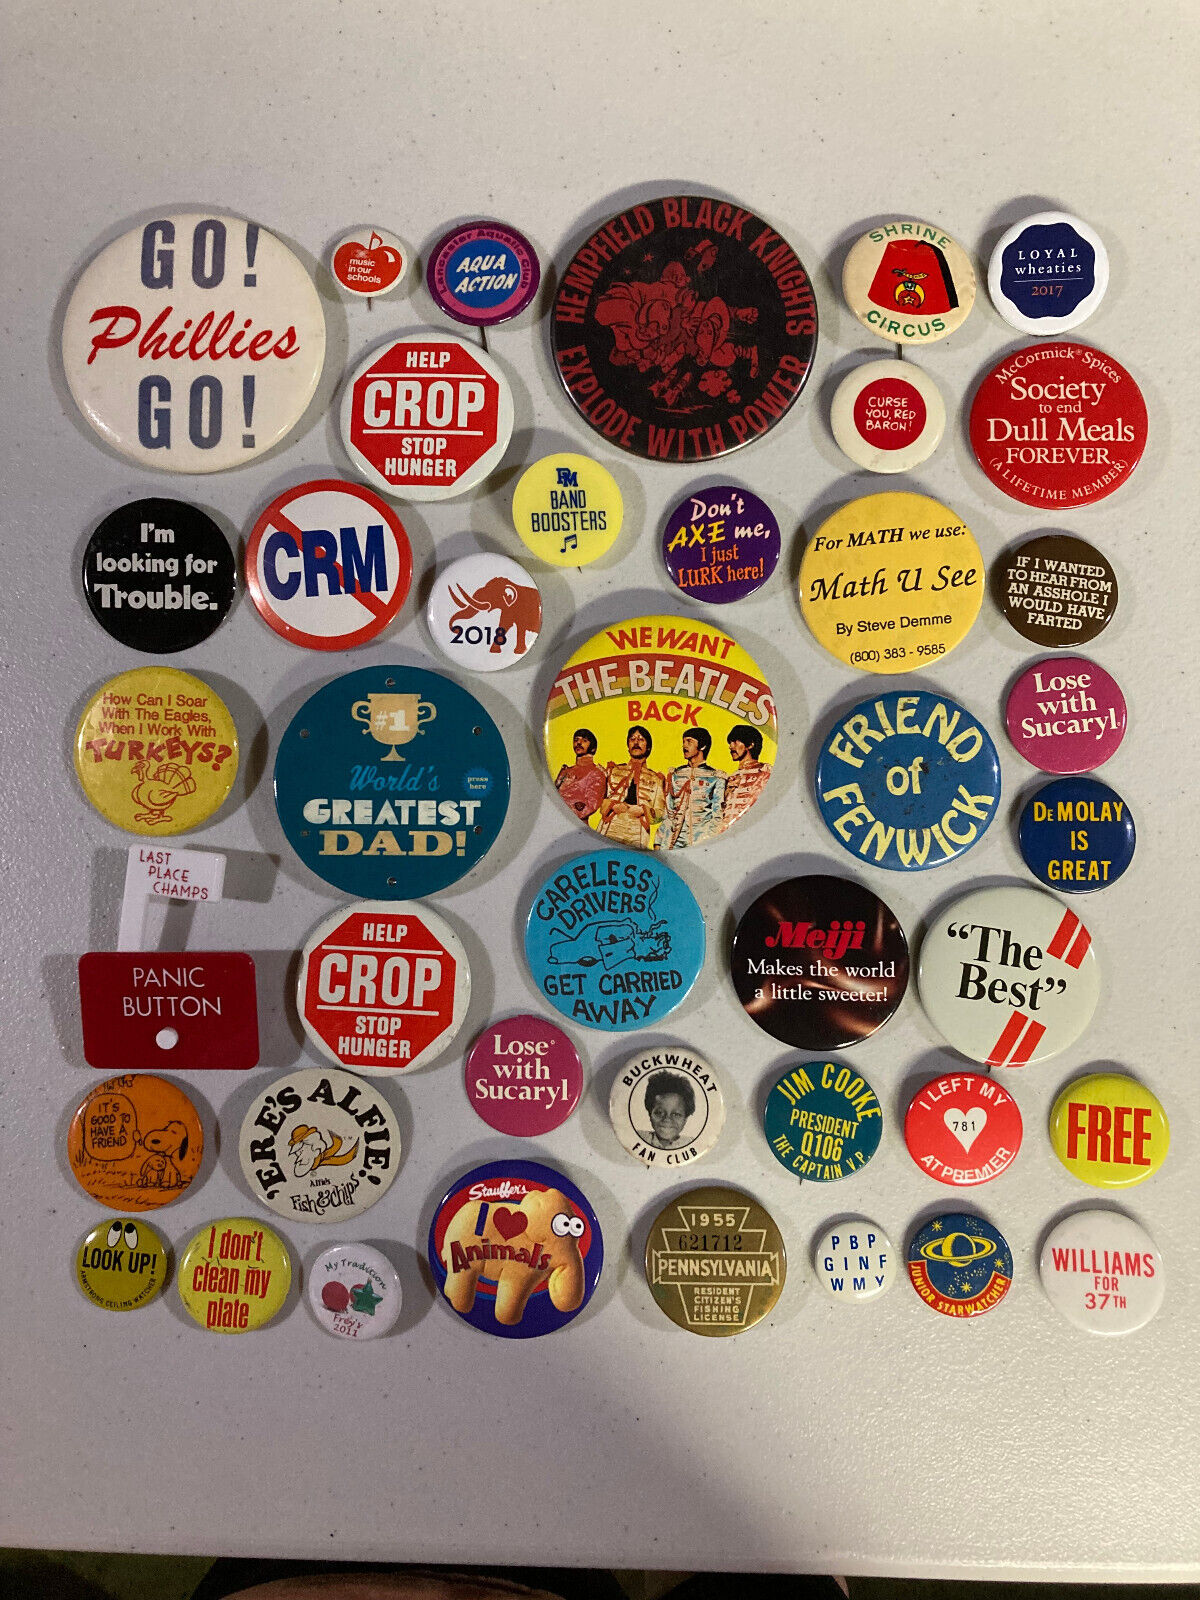 Lot of 42 Vintage/Retro Novelty Button Pins (some are very old ... see photos)